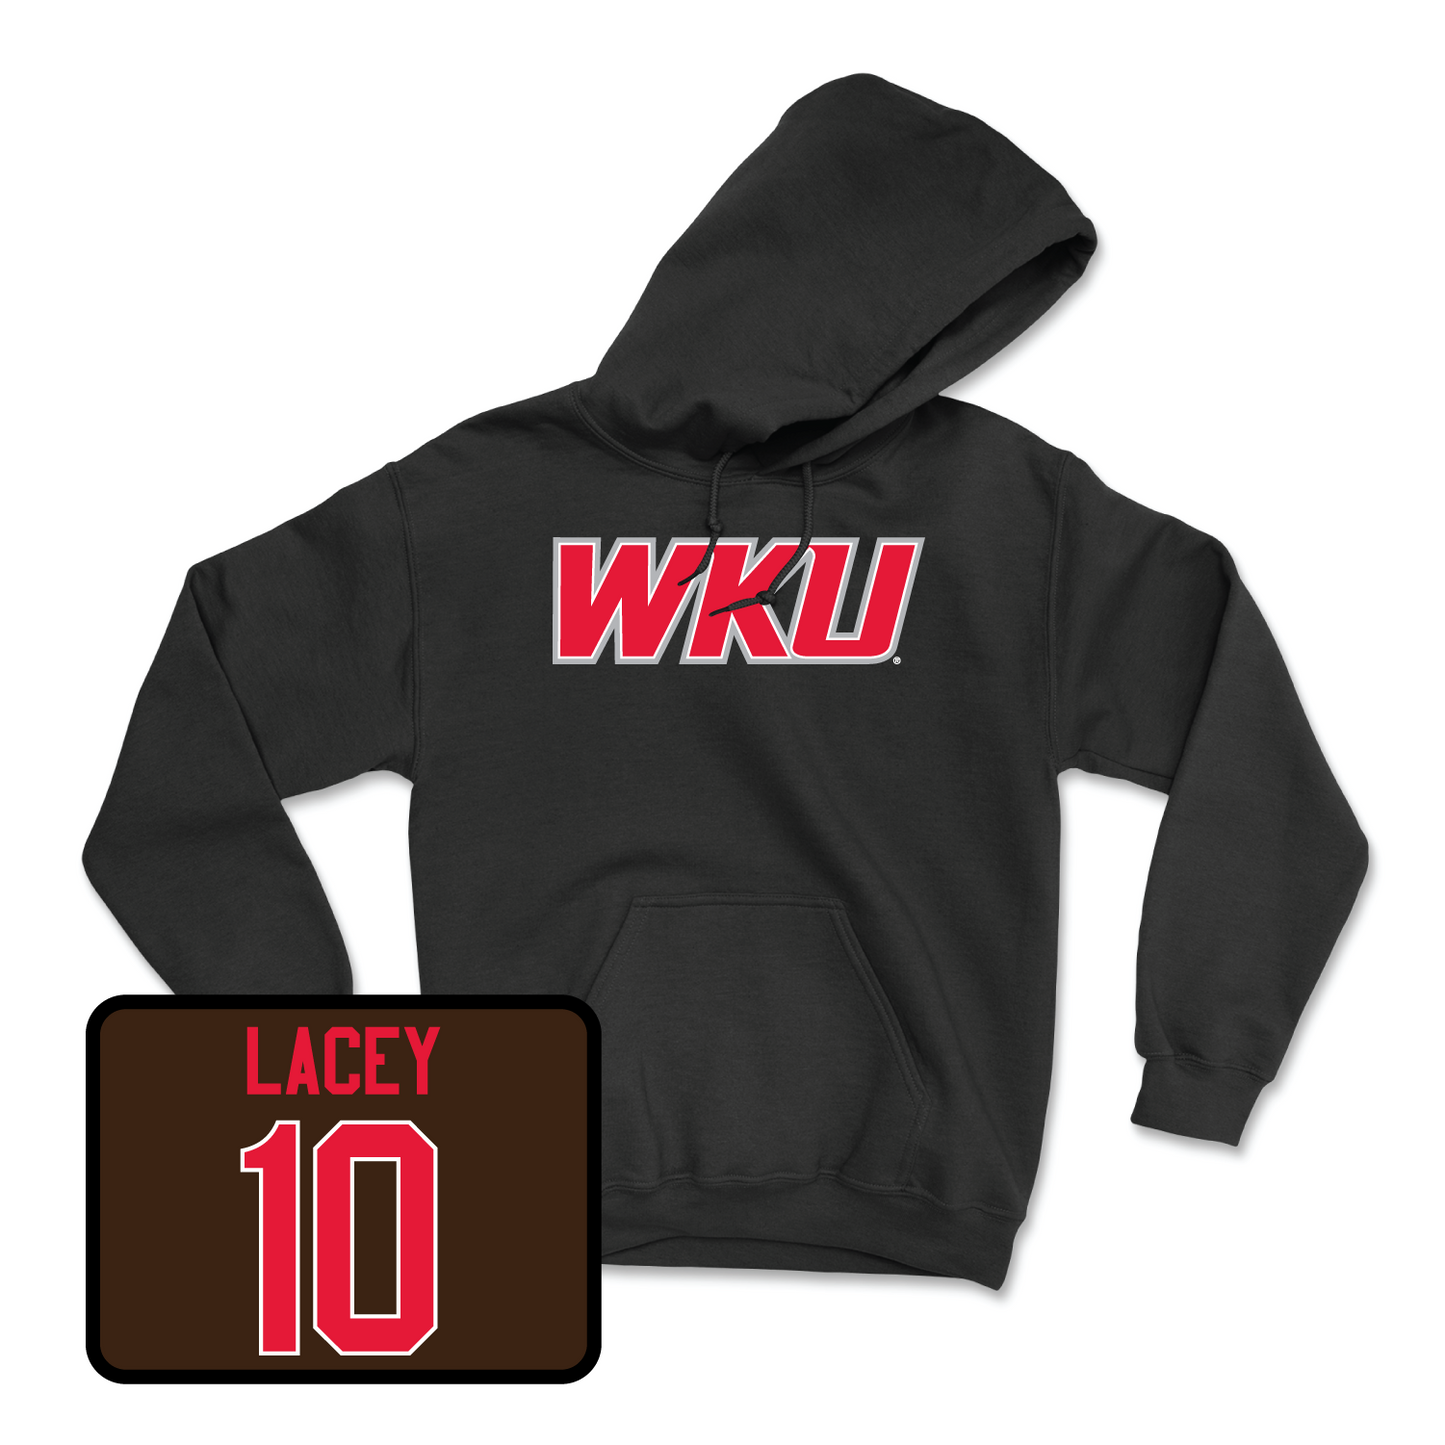 Black Women's Soccer WKU Hoodie 3 Youth Small / Paige Lacey | #10